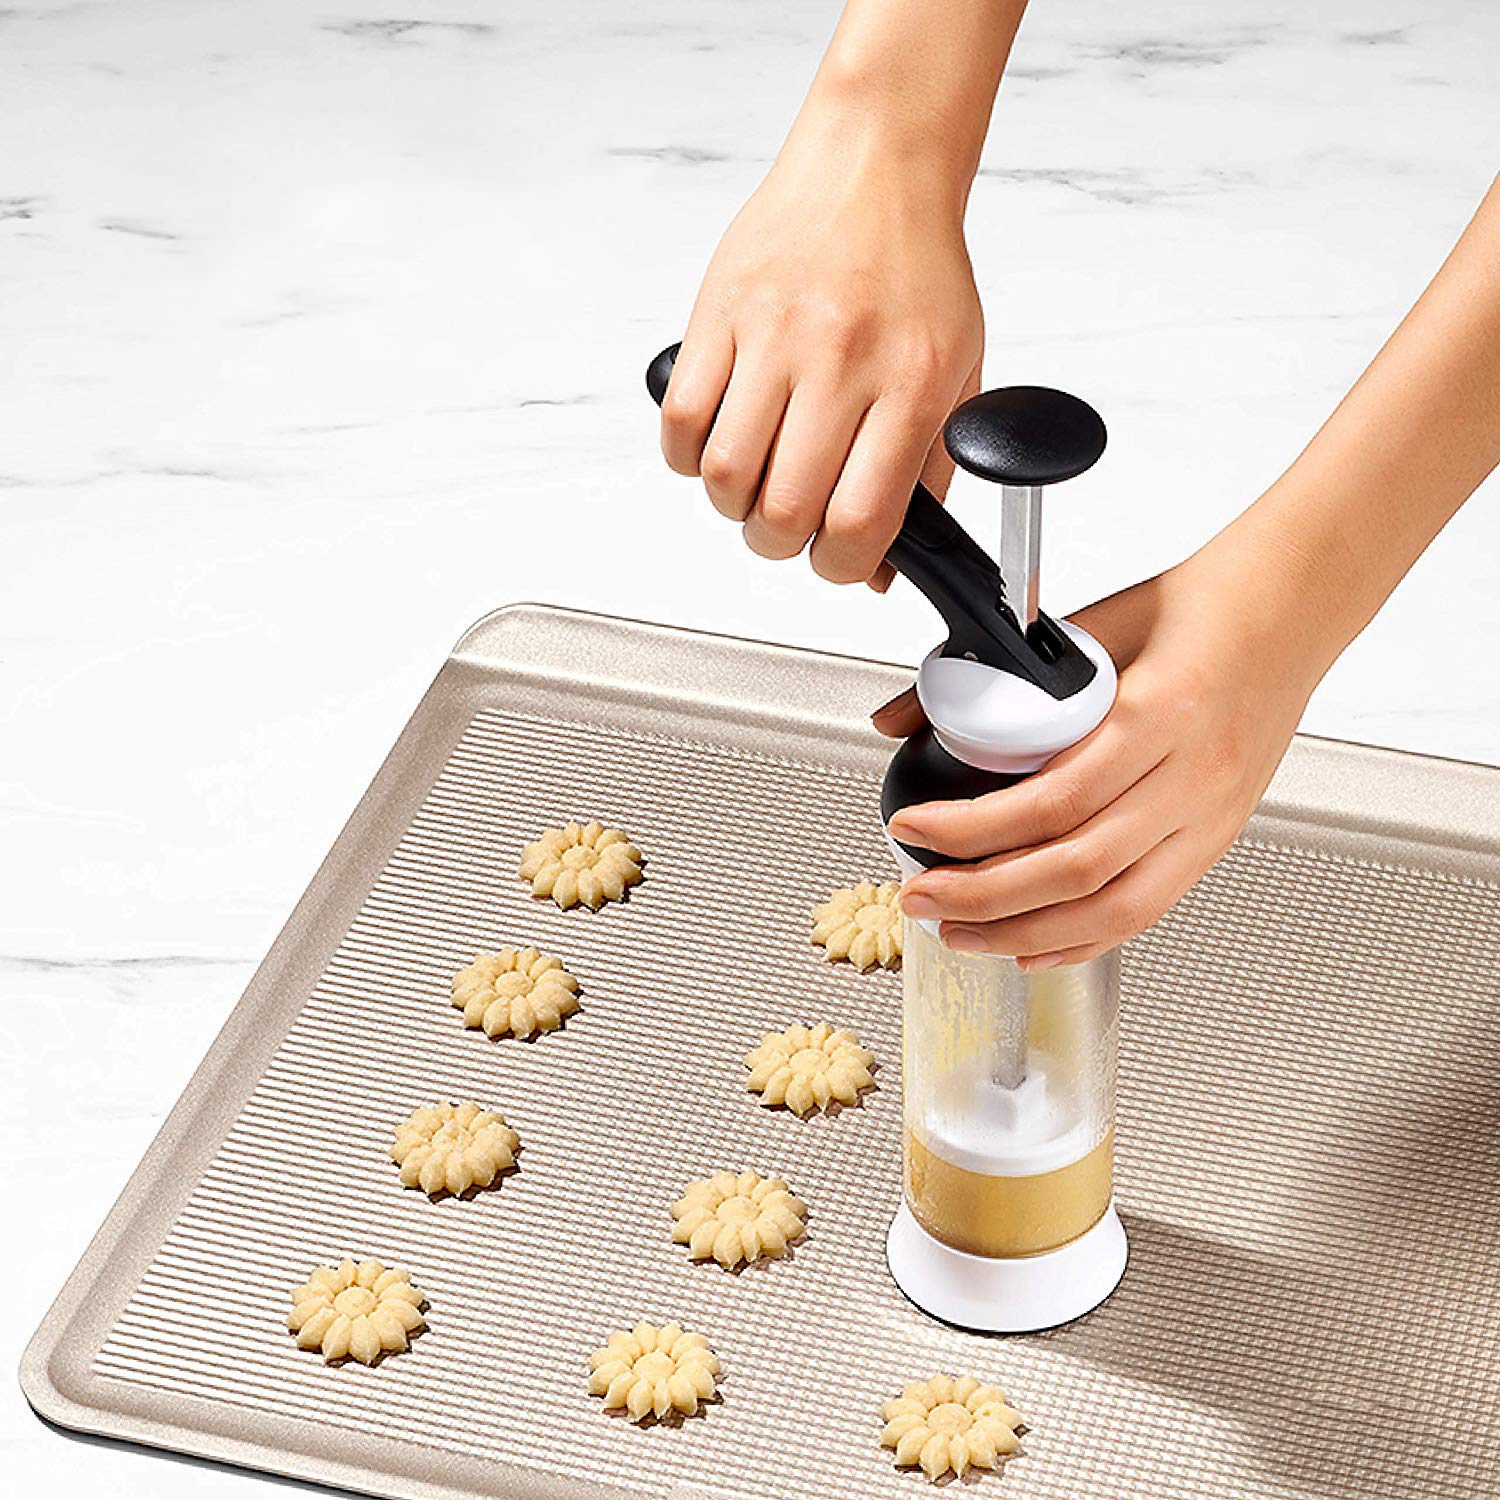 https://www.tasteofhome.com/wp-content/uploads/2019/10/OXO-Good-Grips-Cookie-Press-with-Stainless-Steel-Disks-and-Storage-Case-.jpg?fit=700%2C700